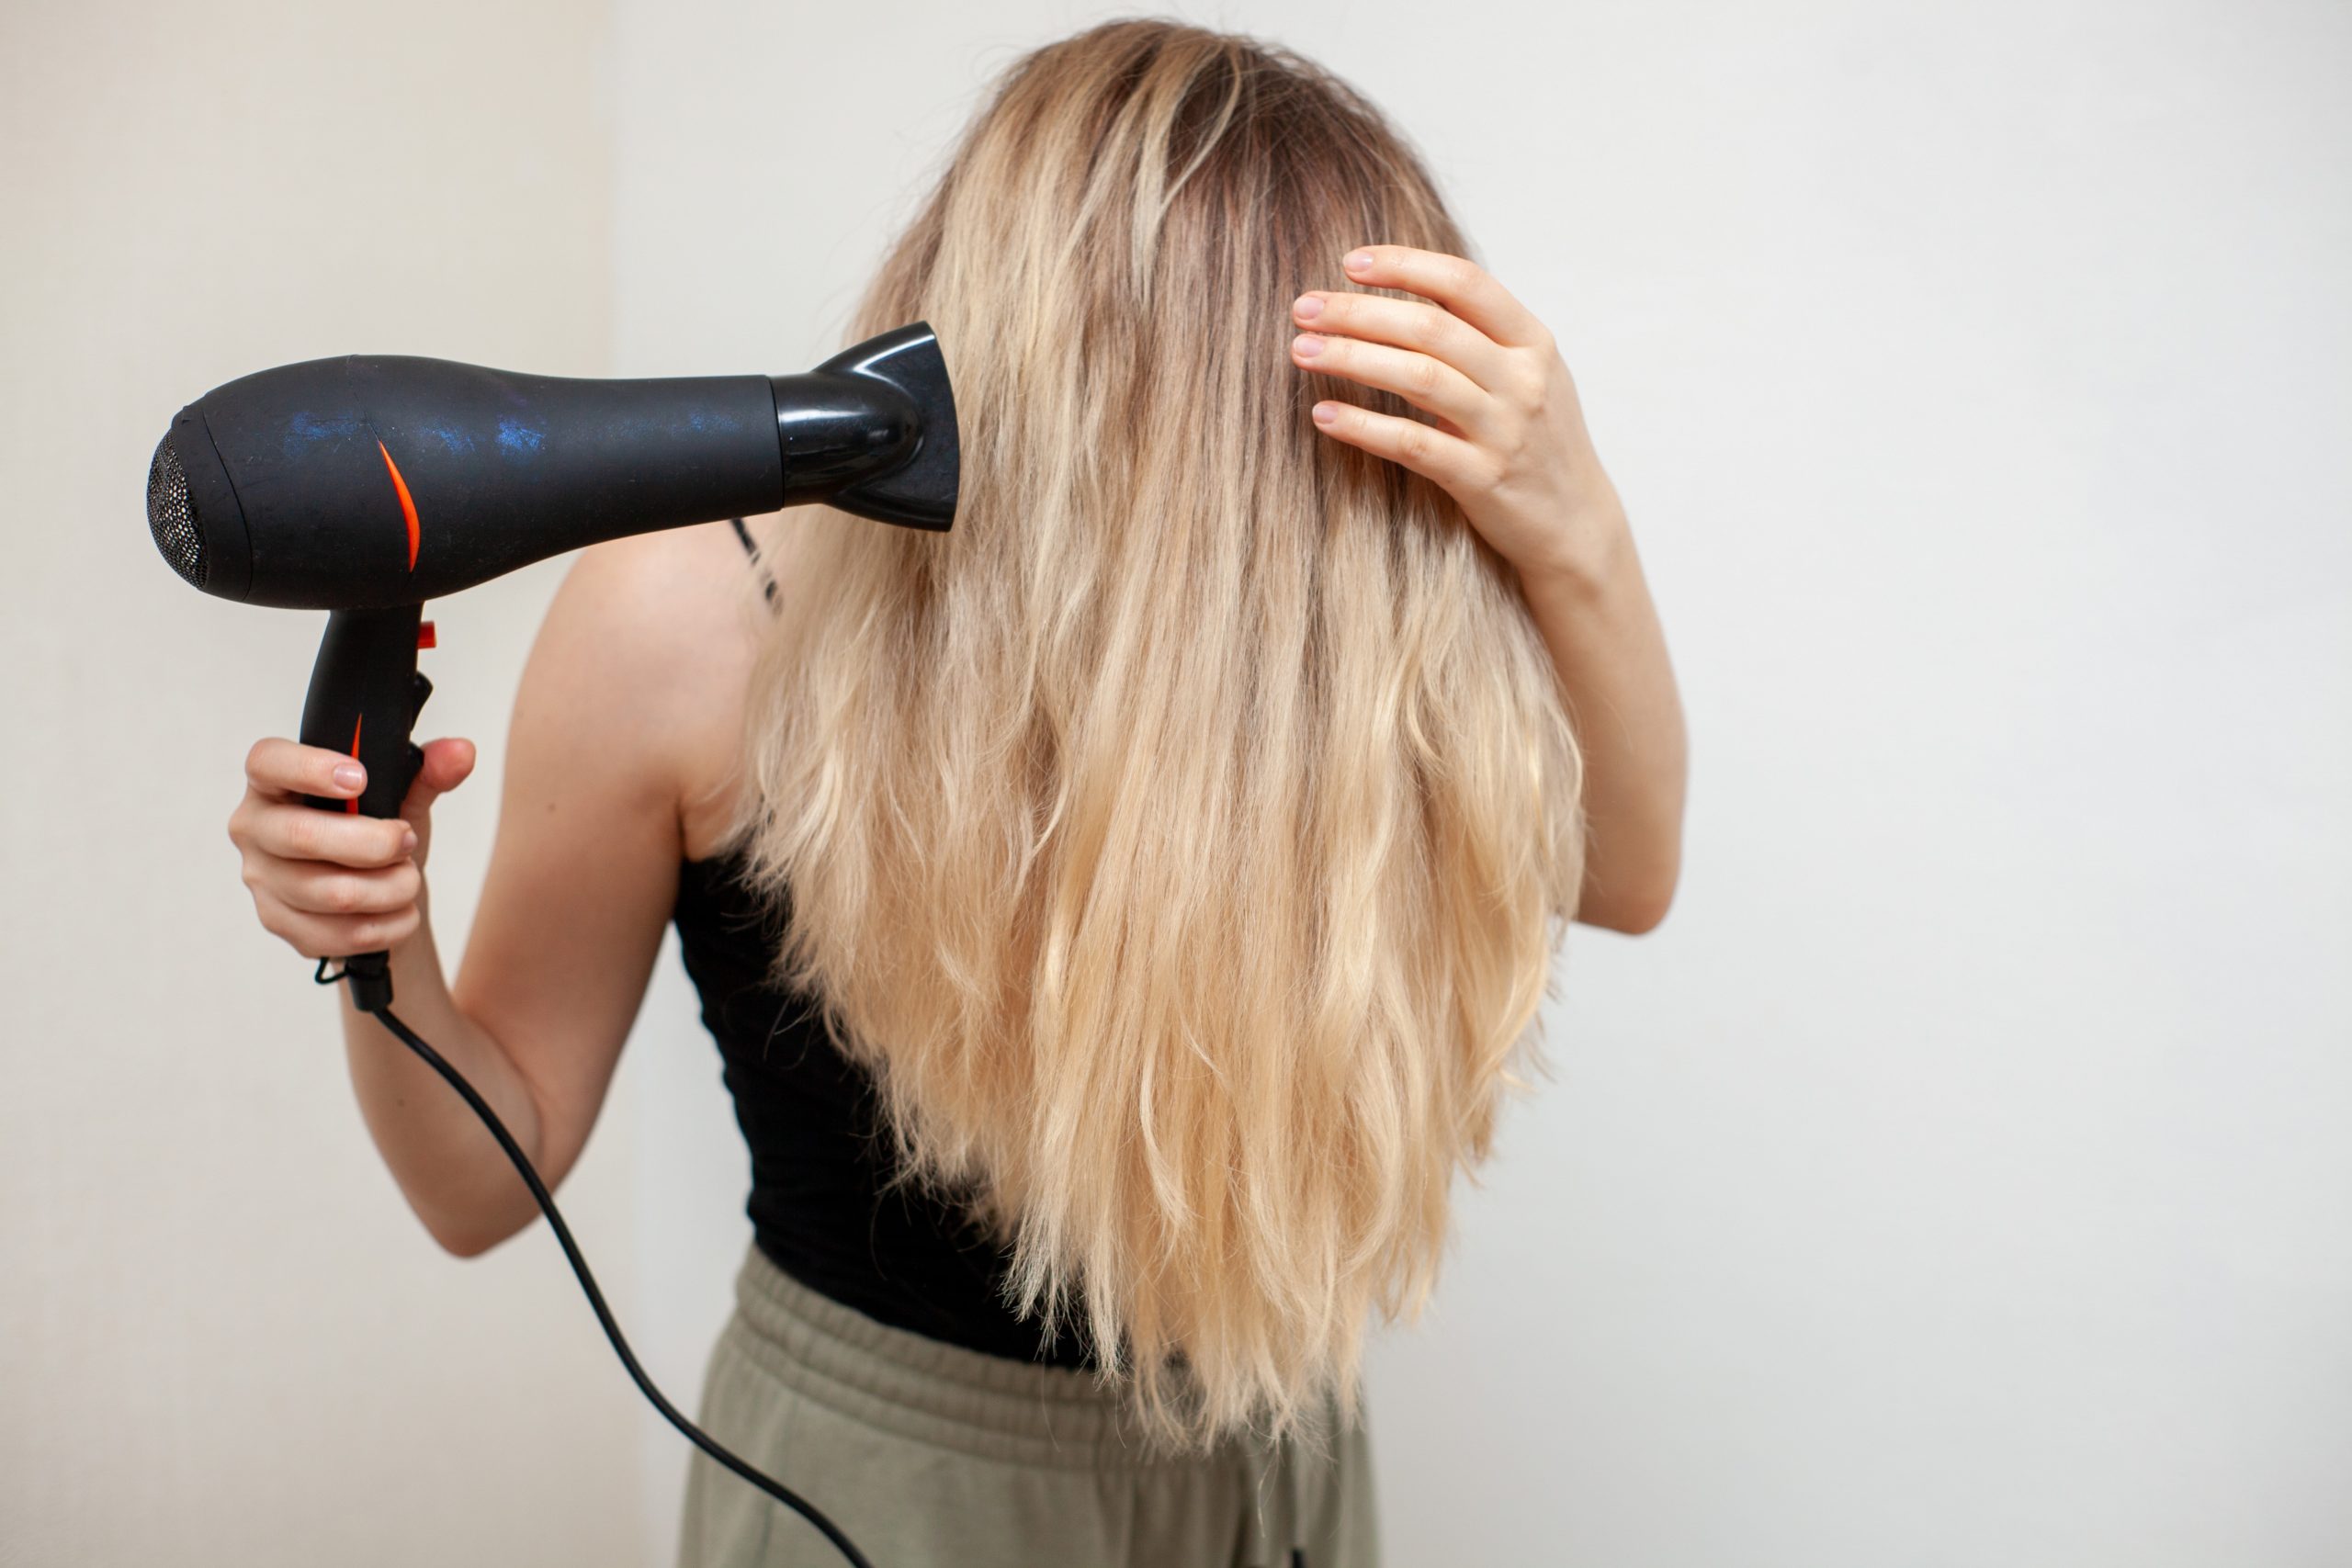 10 of the Best Smart Hair Dryers on the Market